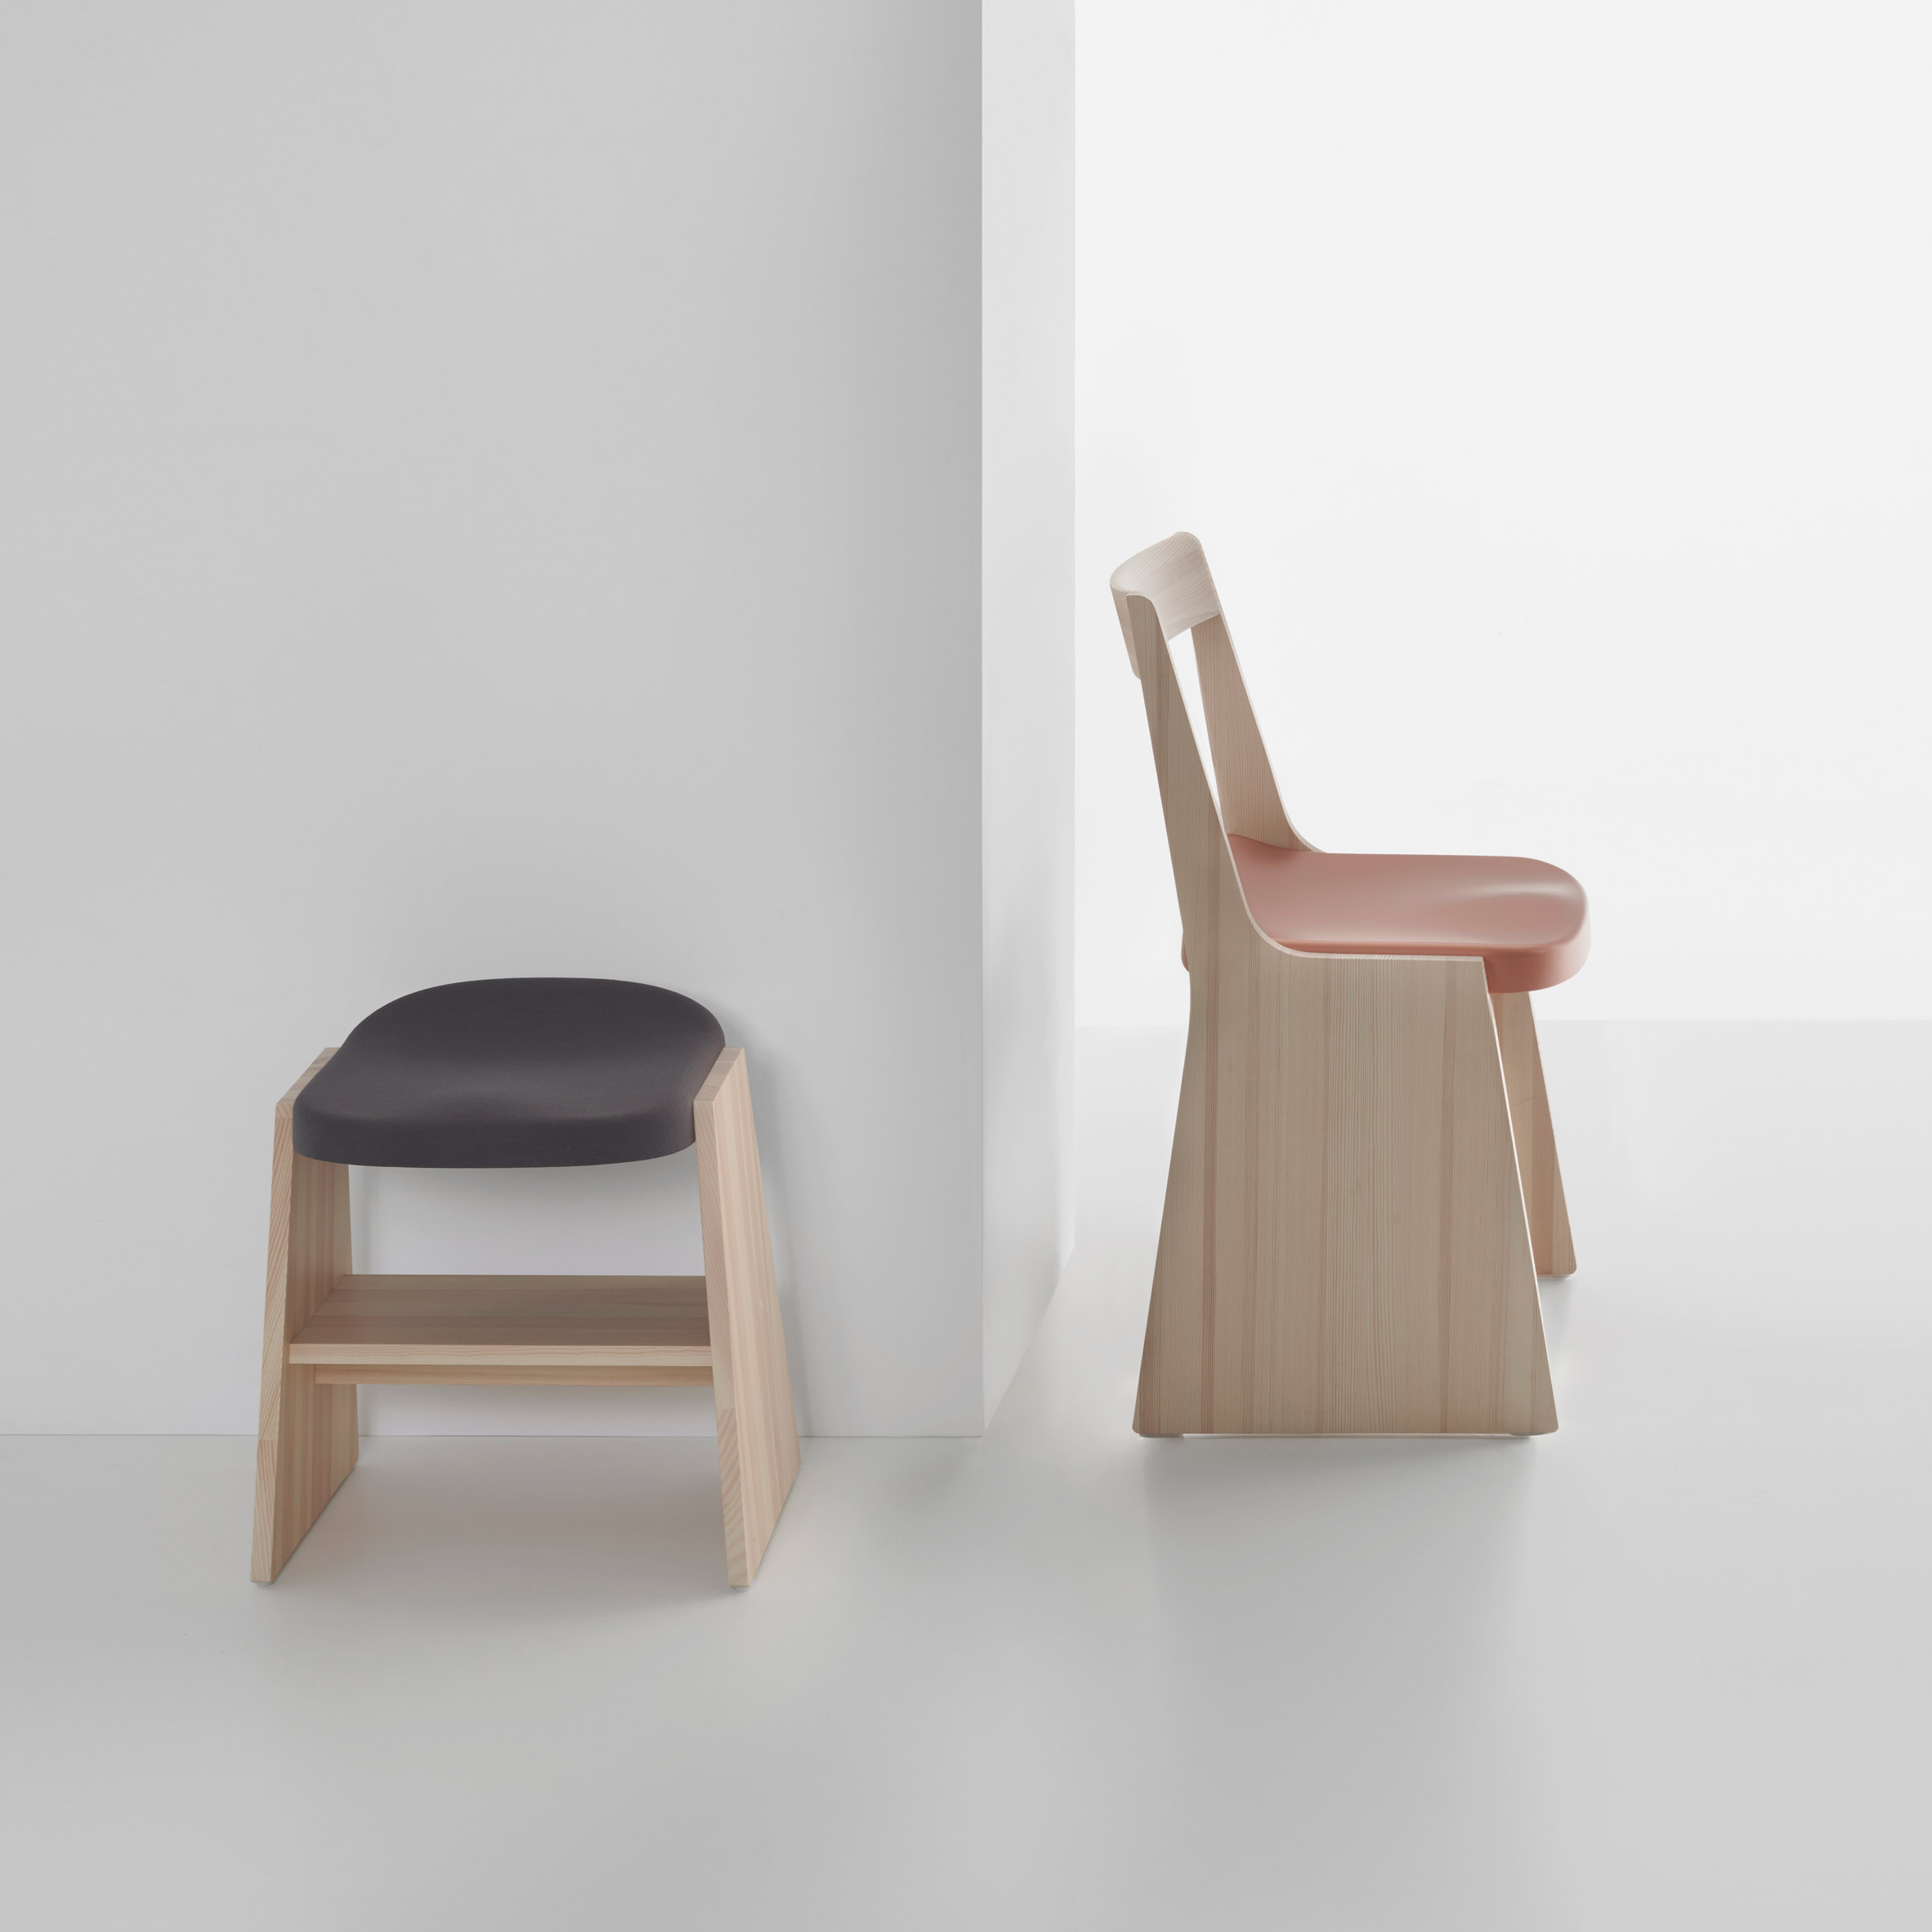 Soft Fronda stool and chair by Industrial Facility for Mattiazzi